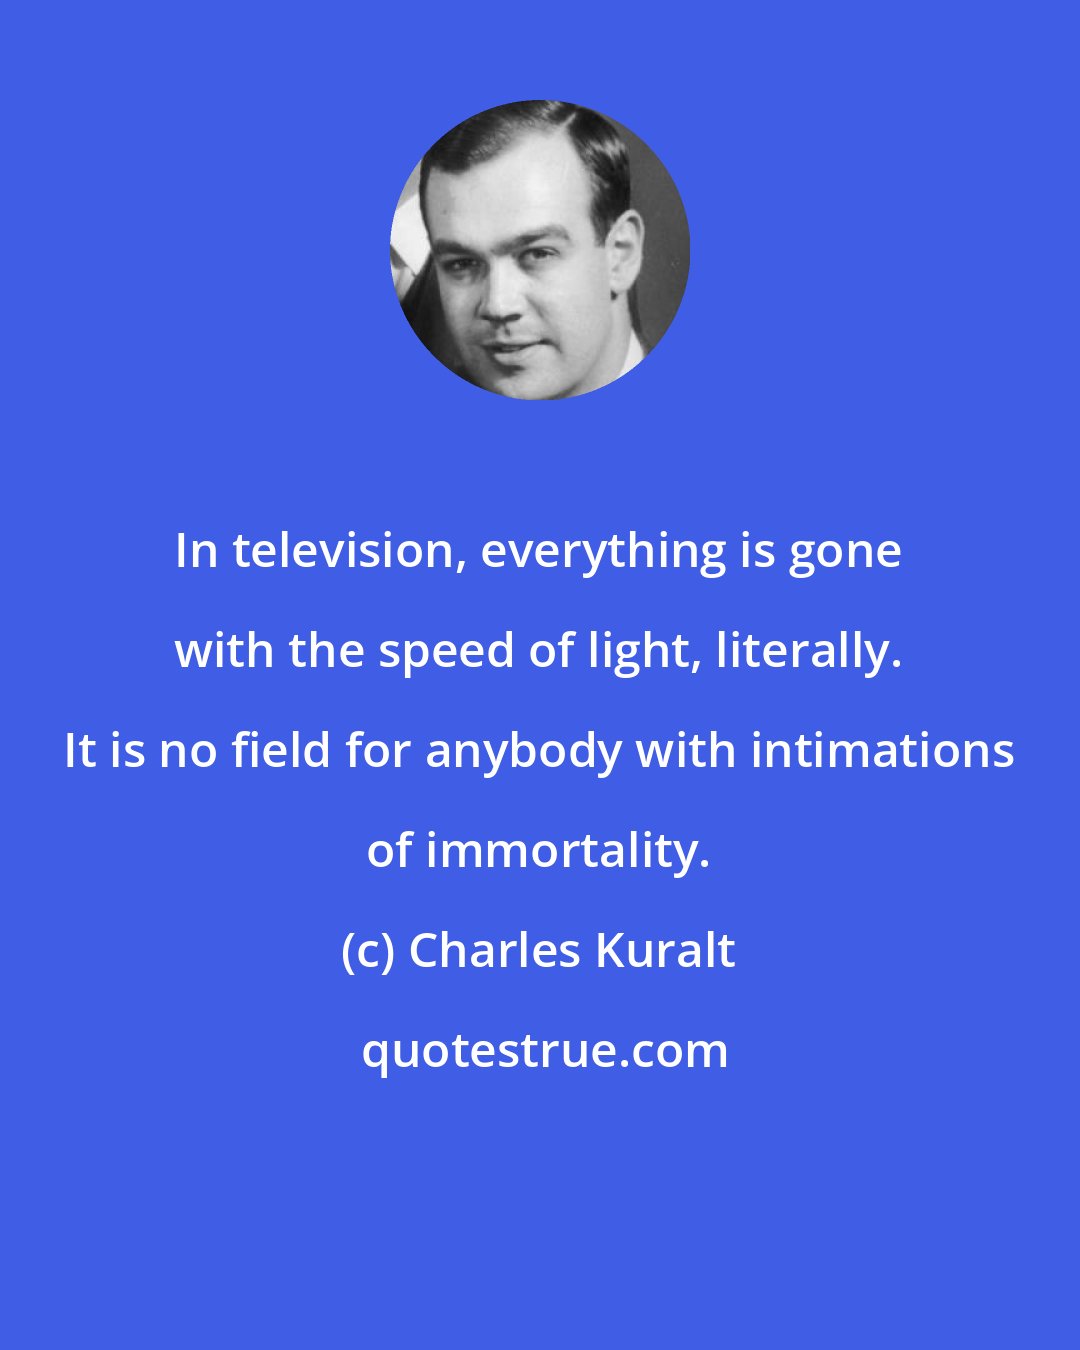 Charles Kuralt: In television, everything is gone with the speed of light, literally. It is no field for anybody with intimations of immortality.